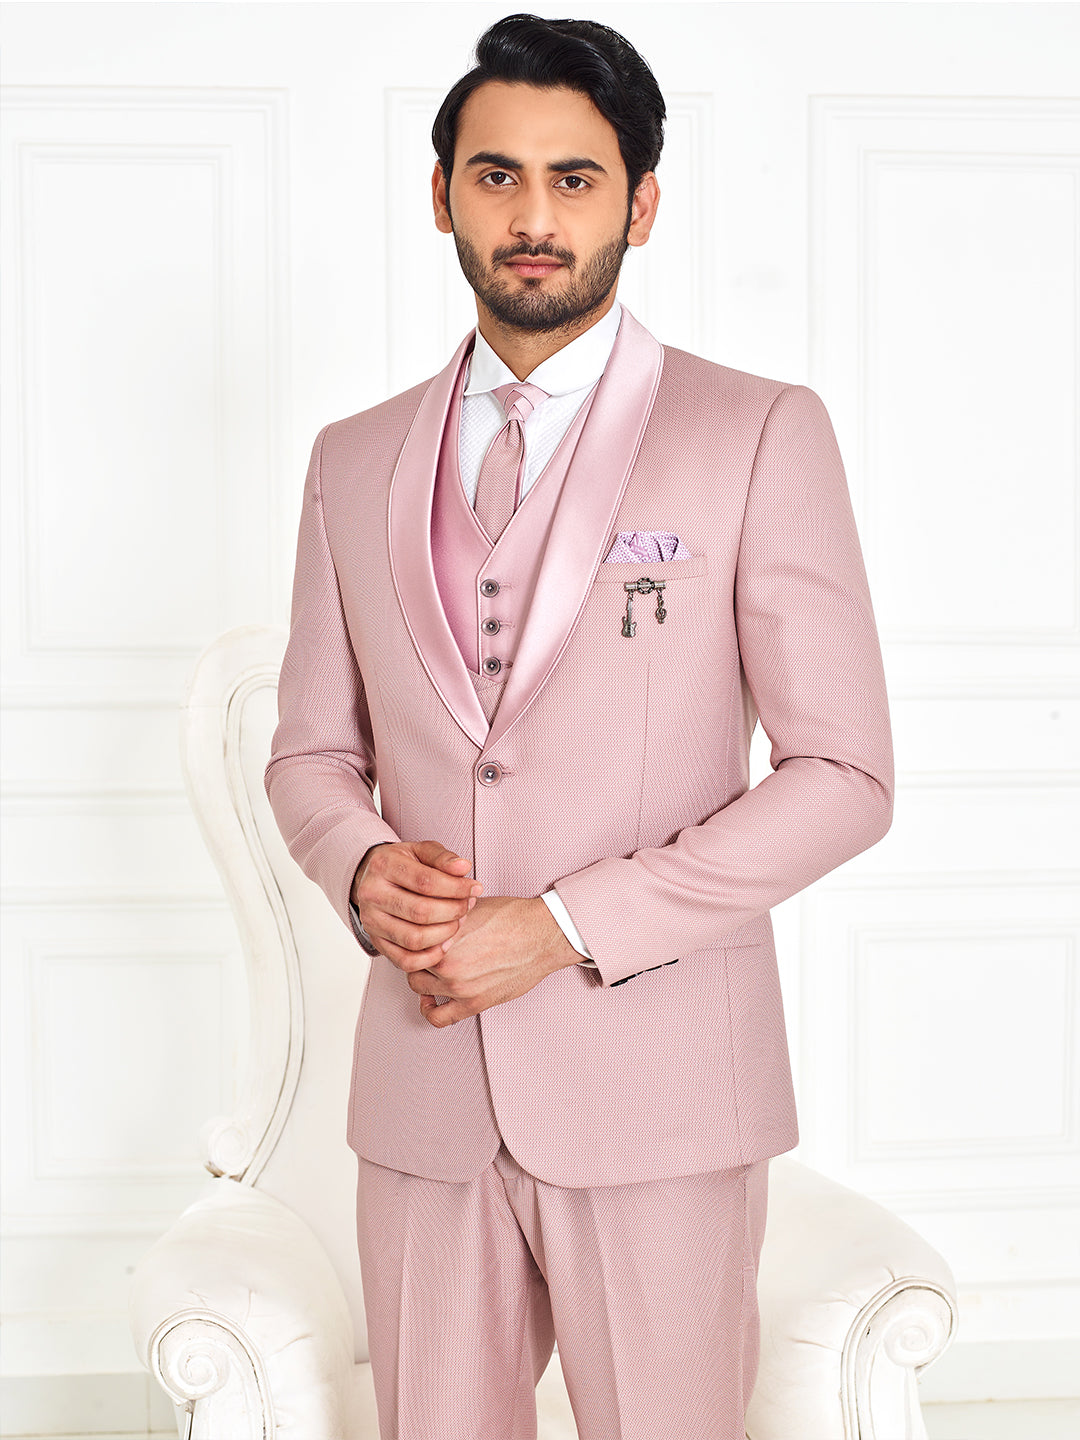 The Ultimate Guide On Suit Styling Ideas For Men | Wedding suits men blue, Wedding  suits men, Suit fashion